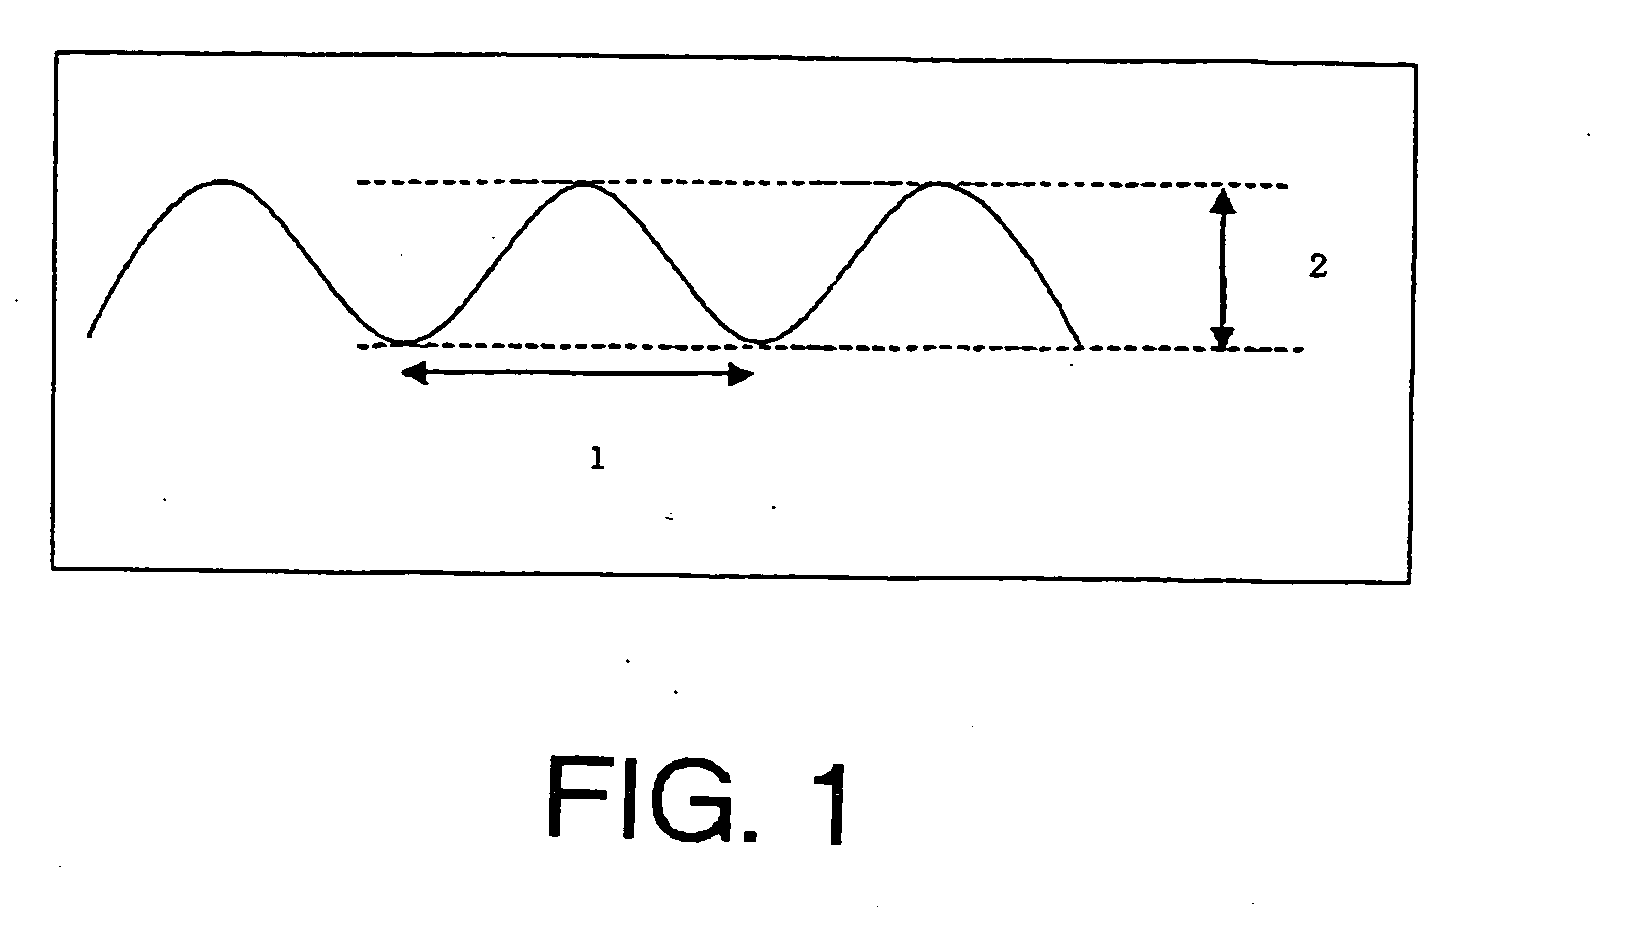 Hollow fiber membrane for blood purification and blood purification apparatus using the same